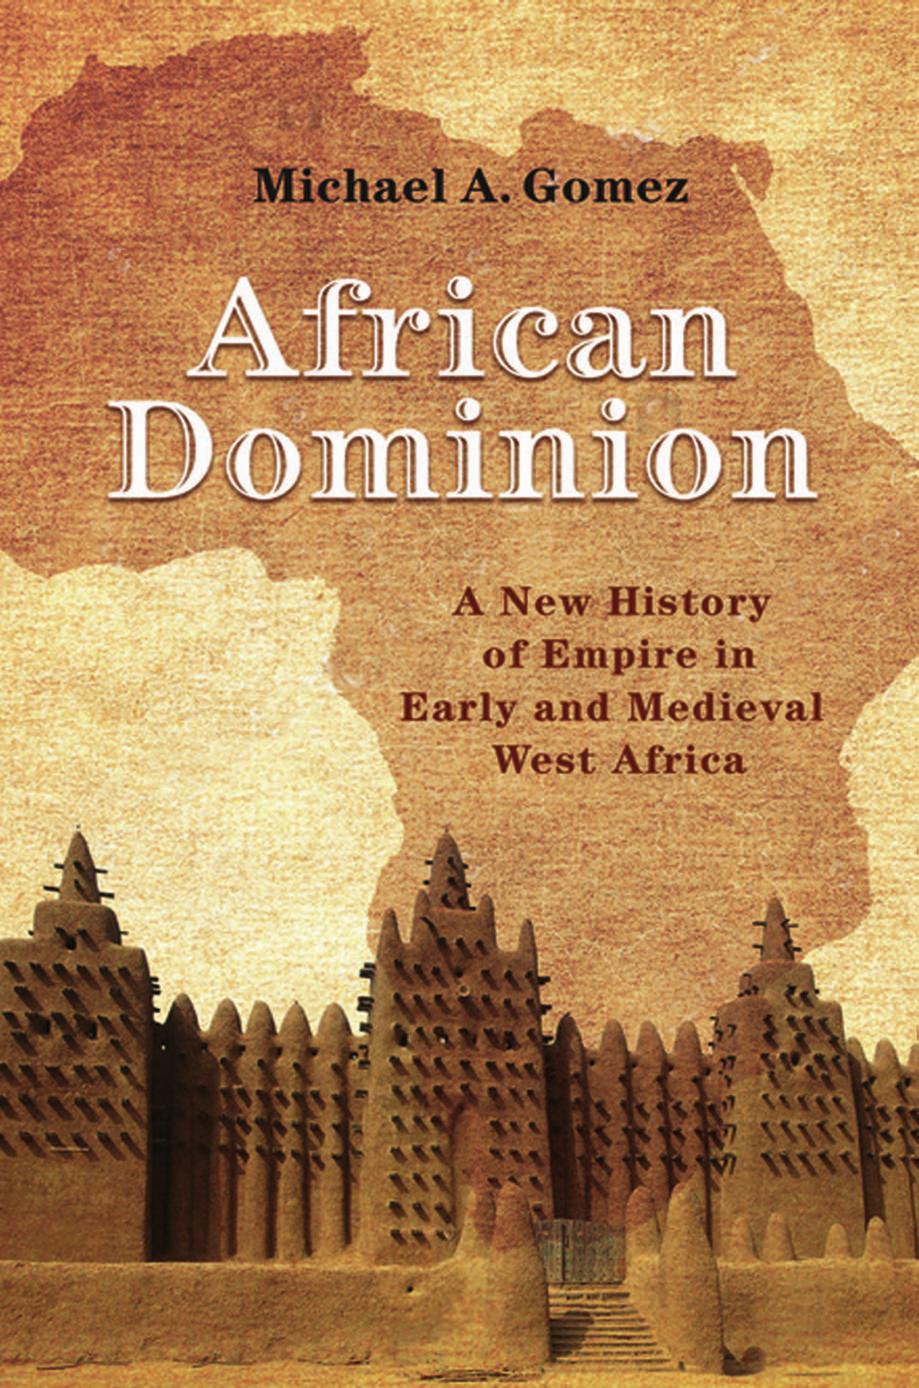 African Dominion A New History of Empire in Early and Medieval West Africa 2018